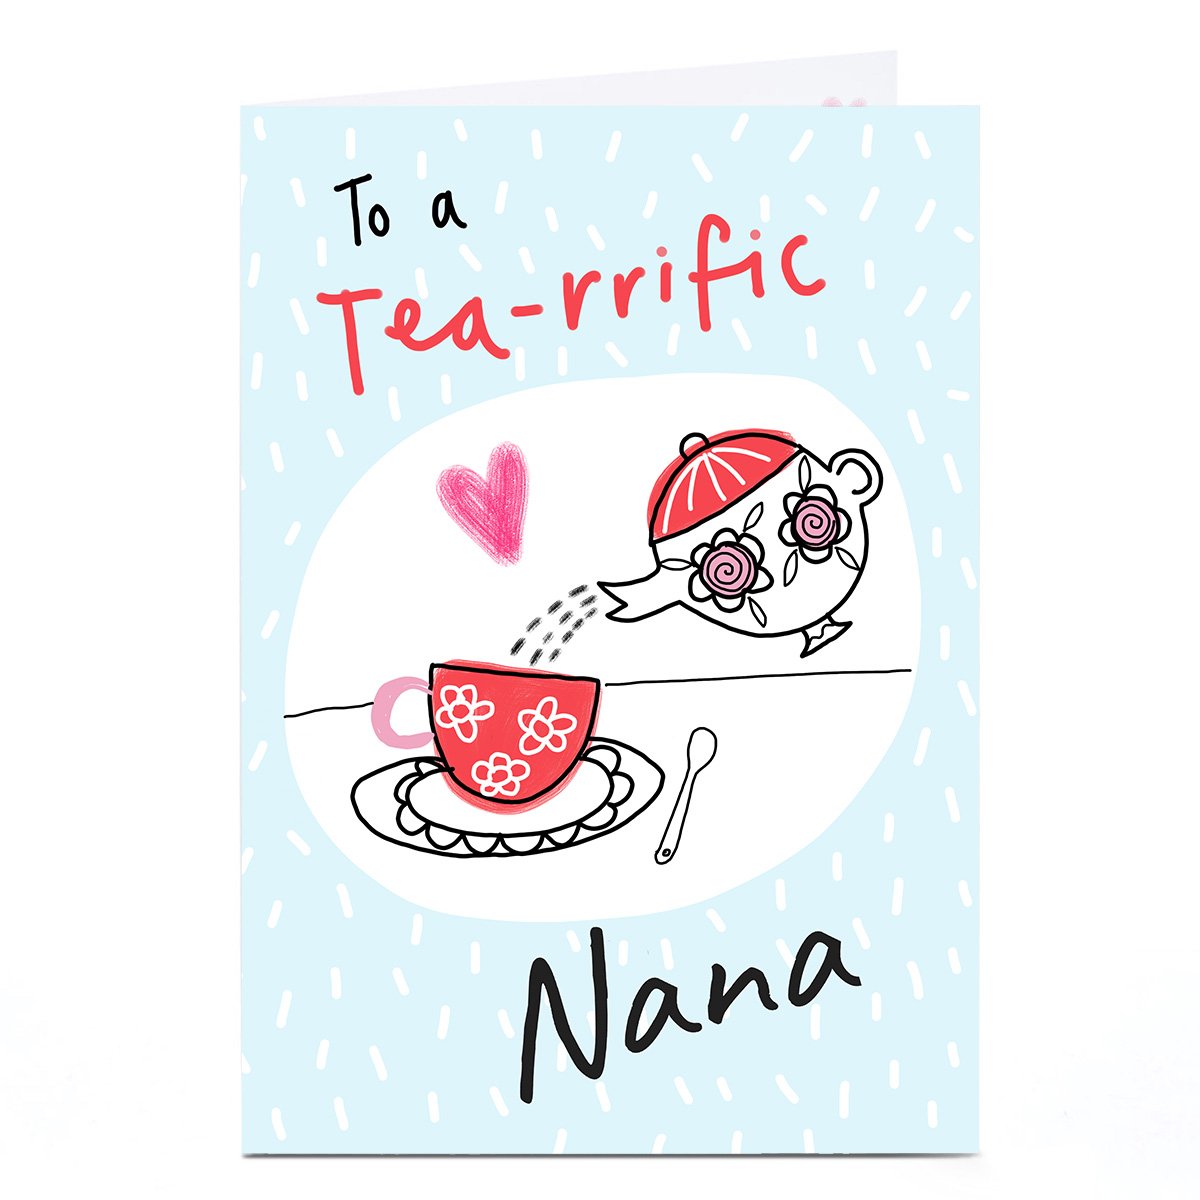 Personalised Lindsay Loves To Draw Mother's Day Card - Tea-riffic 